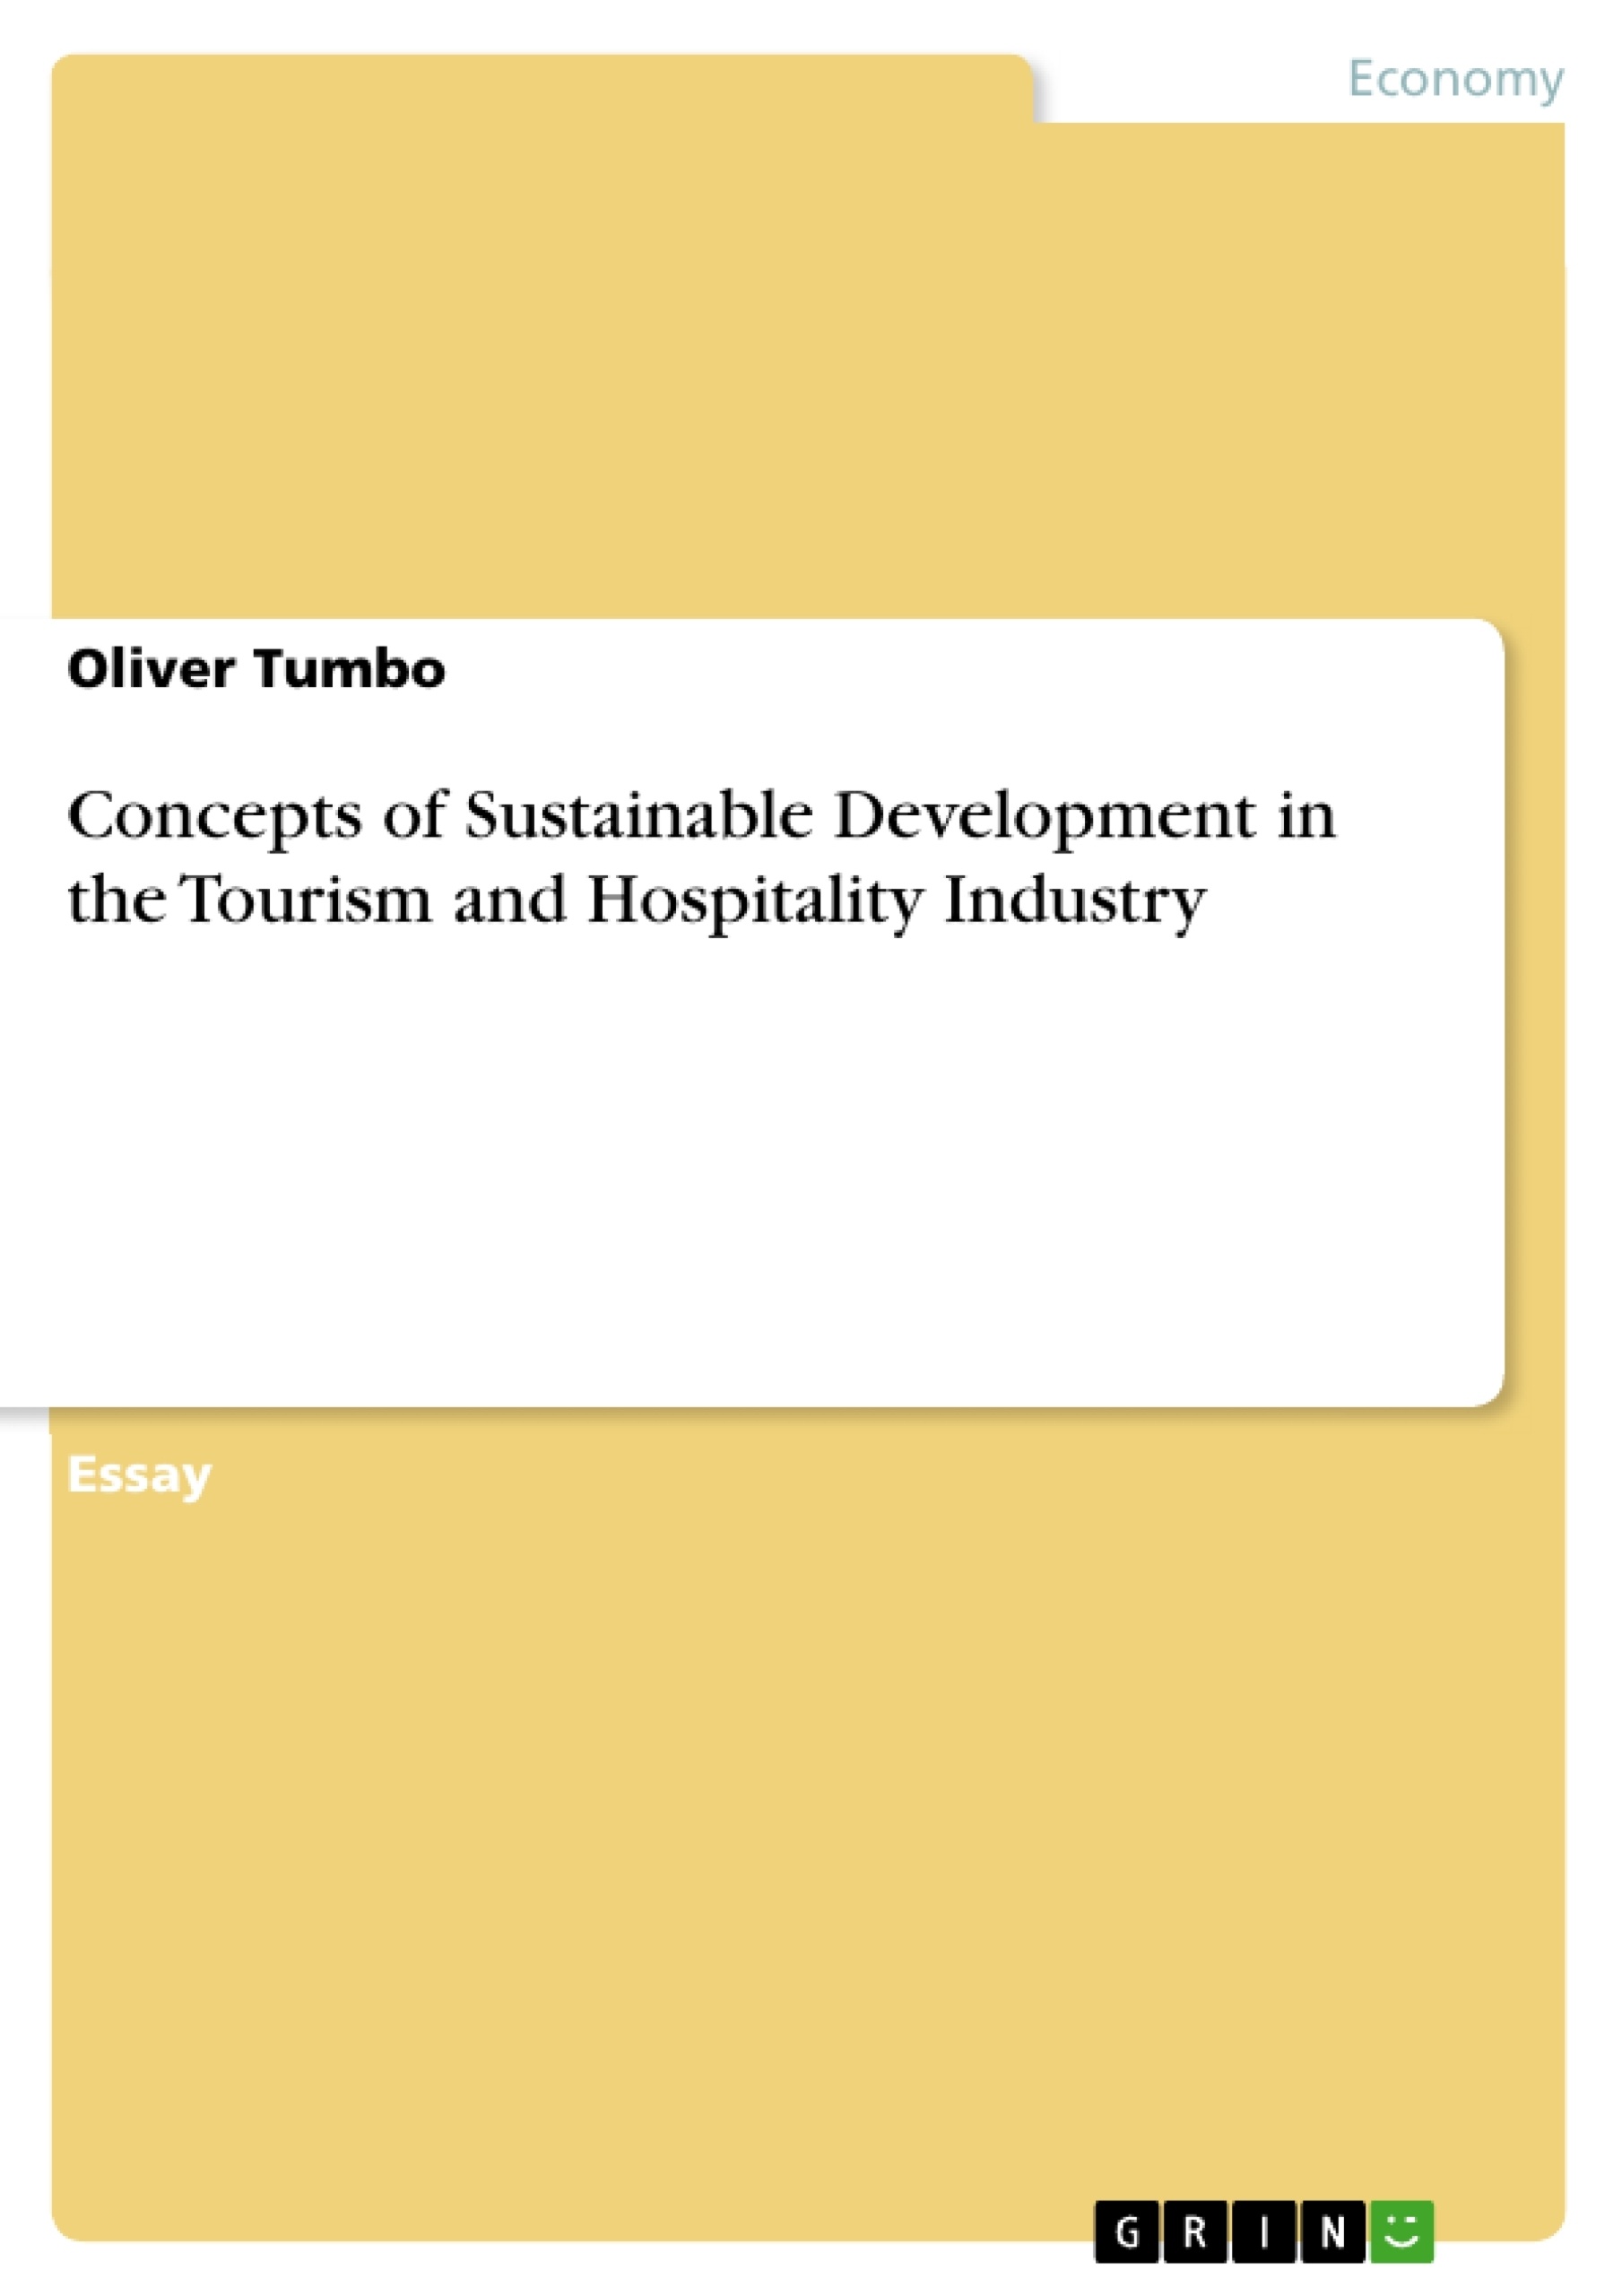 principles of sustainable tourism